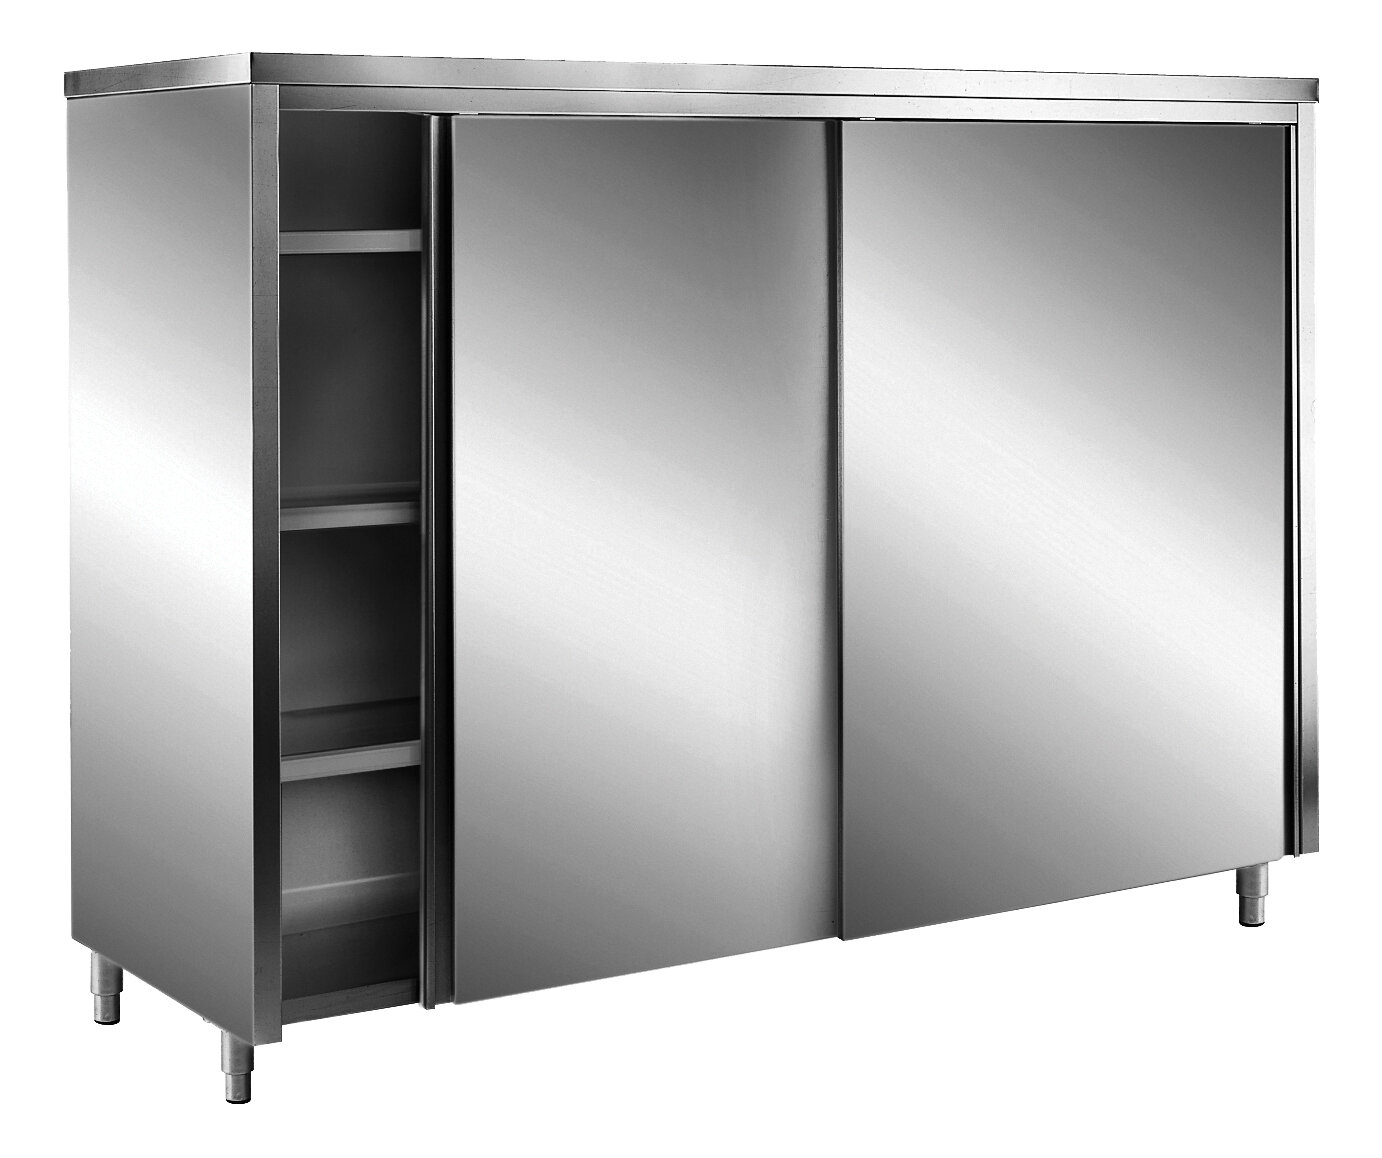 SARO Stainless steel storage cabinets with sliding doors AISI 304, flat roof, 1400x600